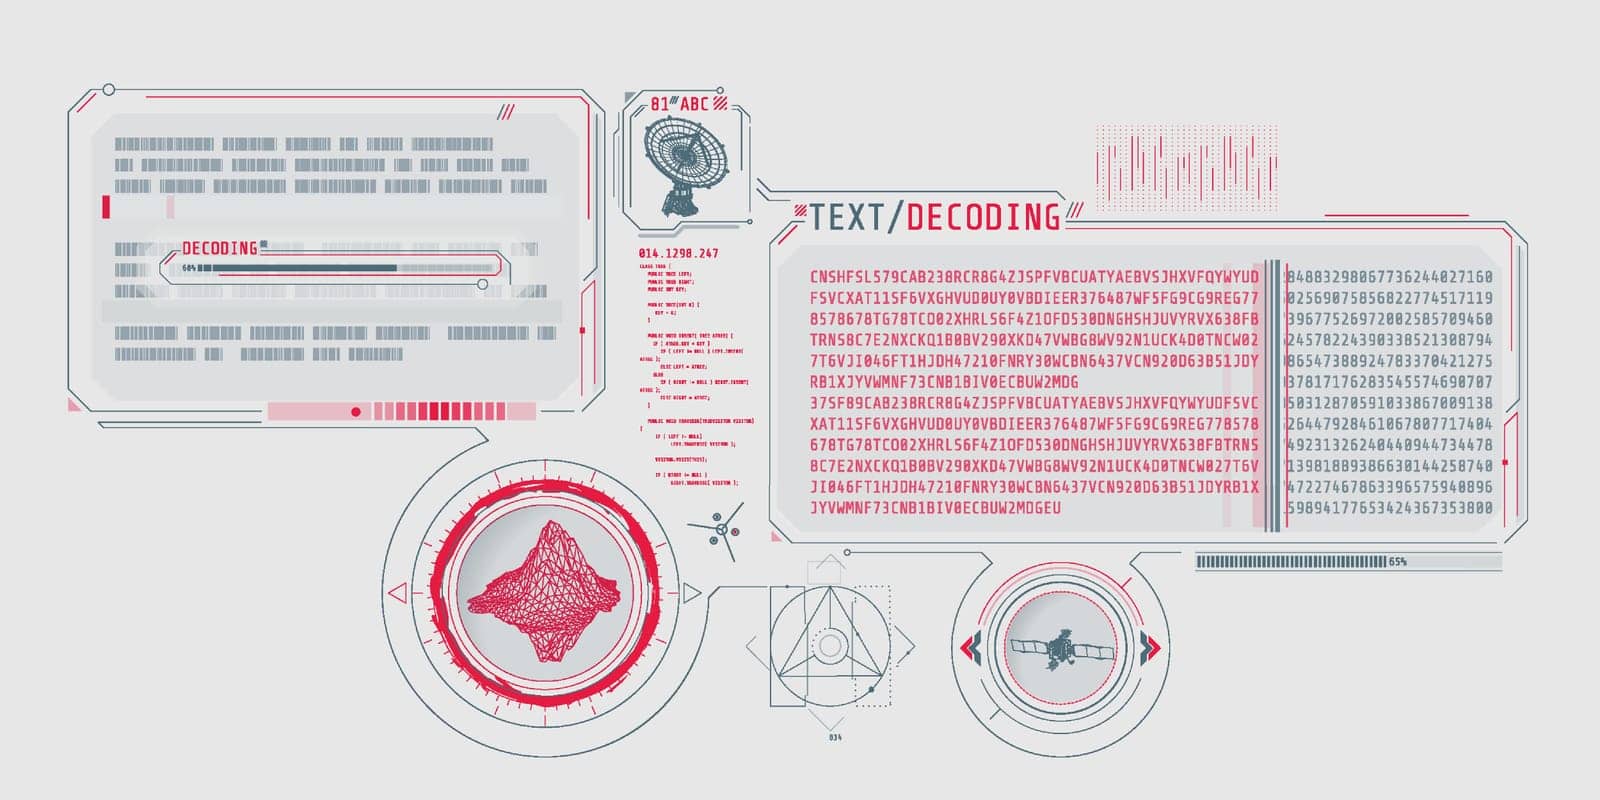 Radio telescope signals are decoded on a futuristic interface screen of the geoscience research program. Vector illustration.